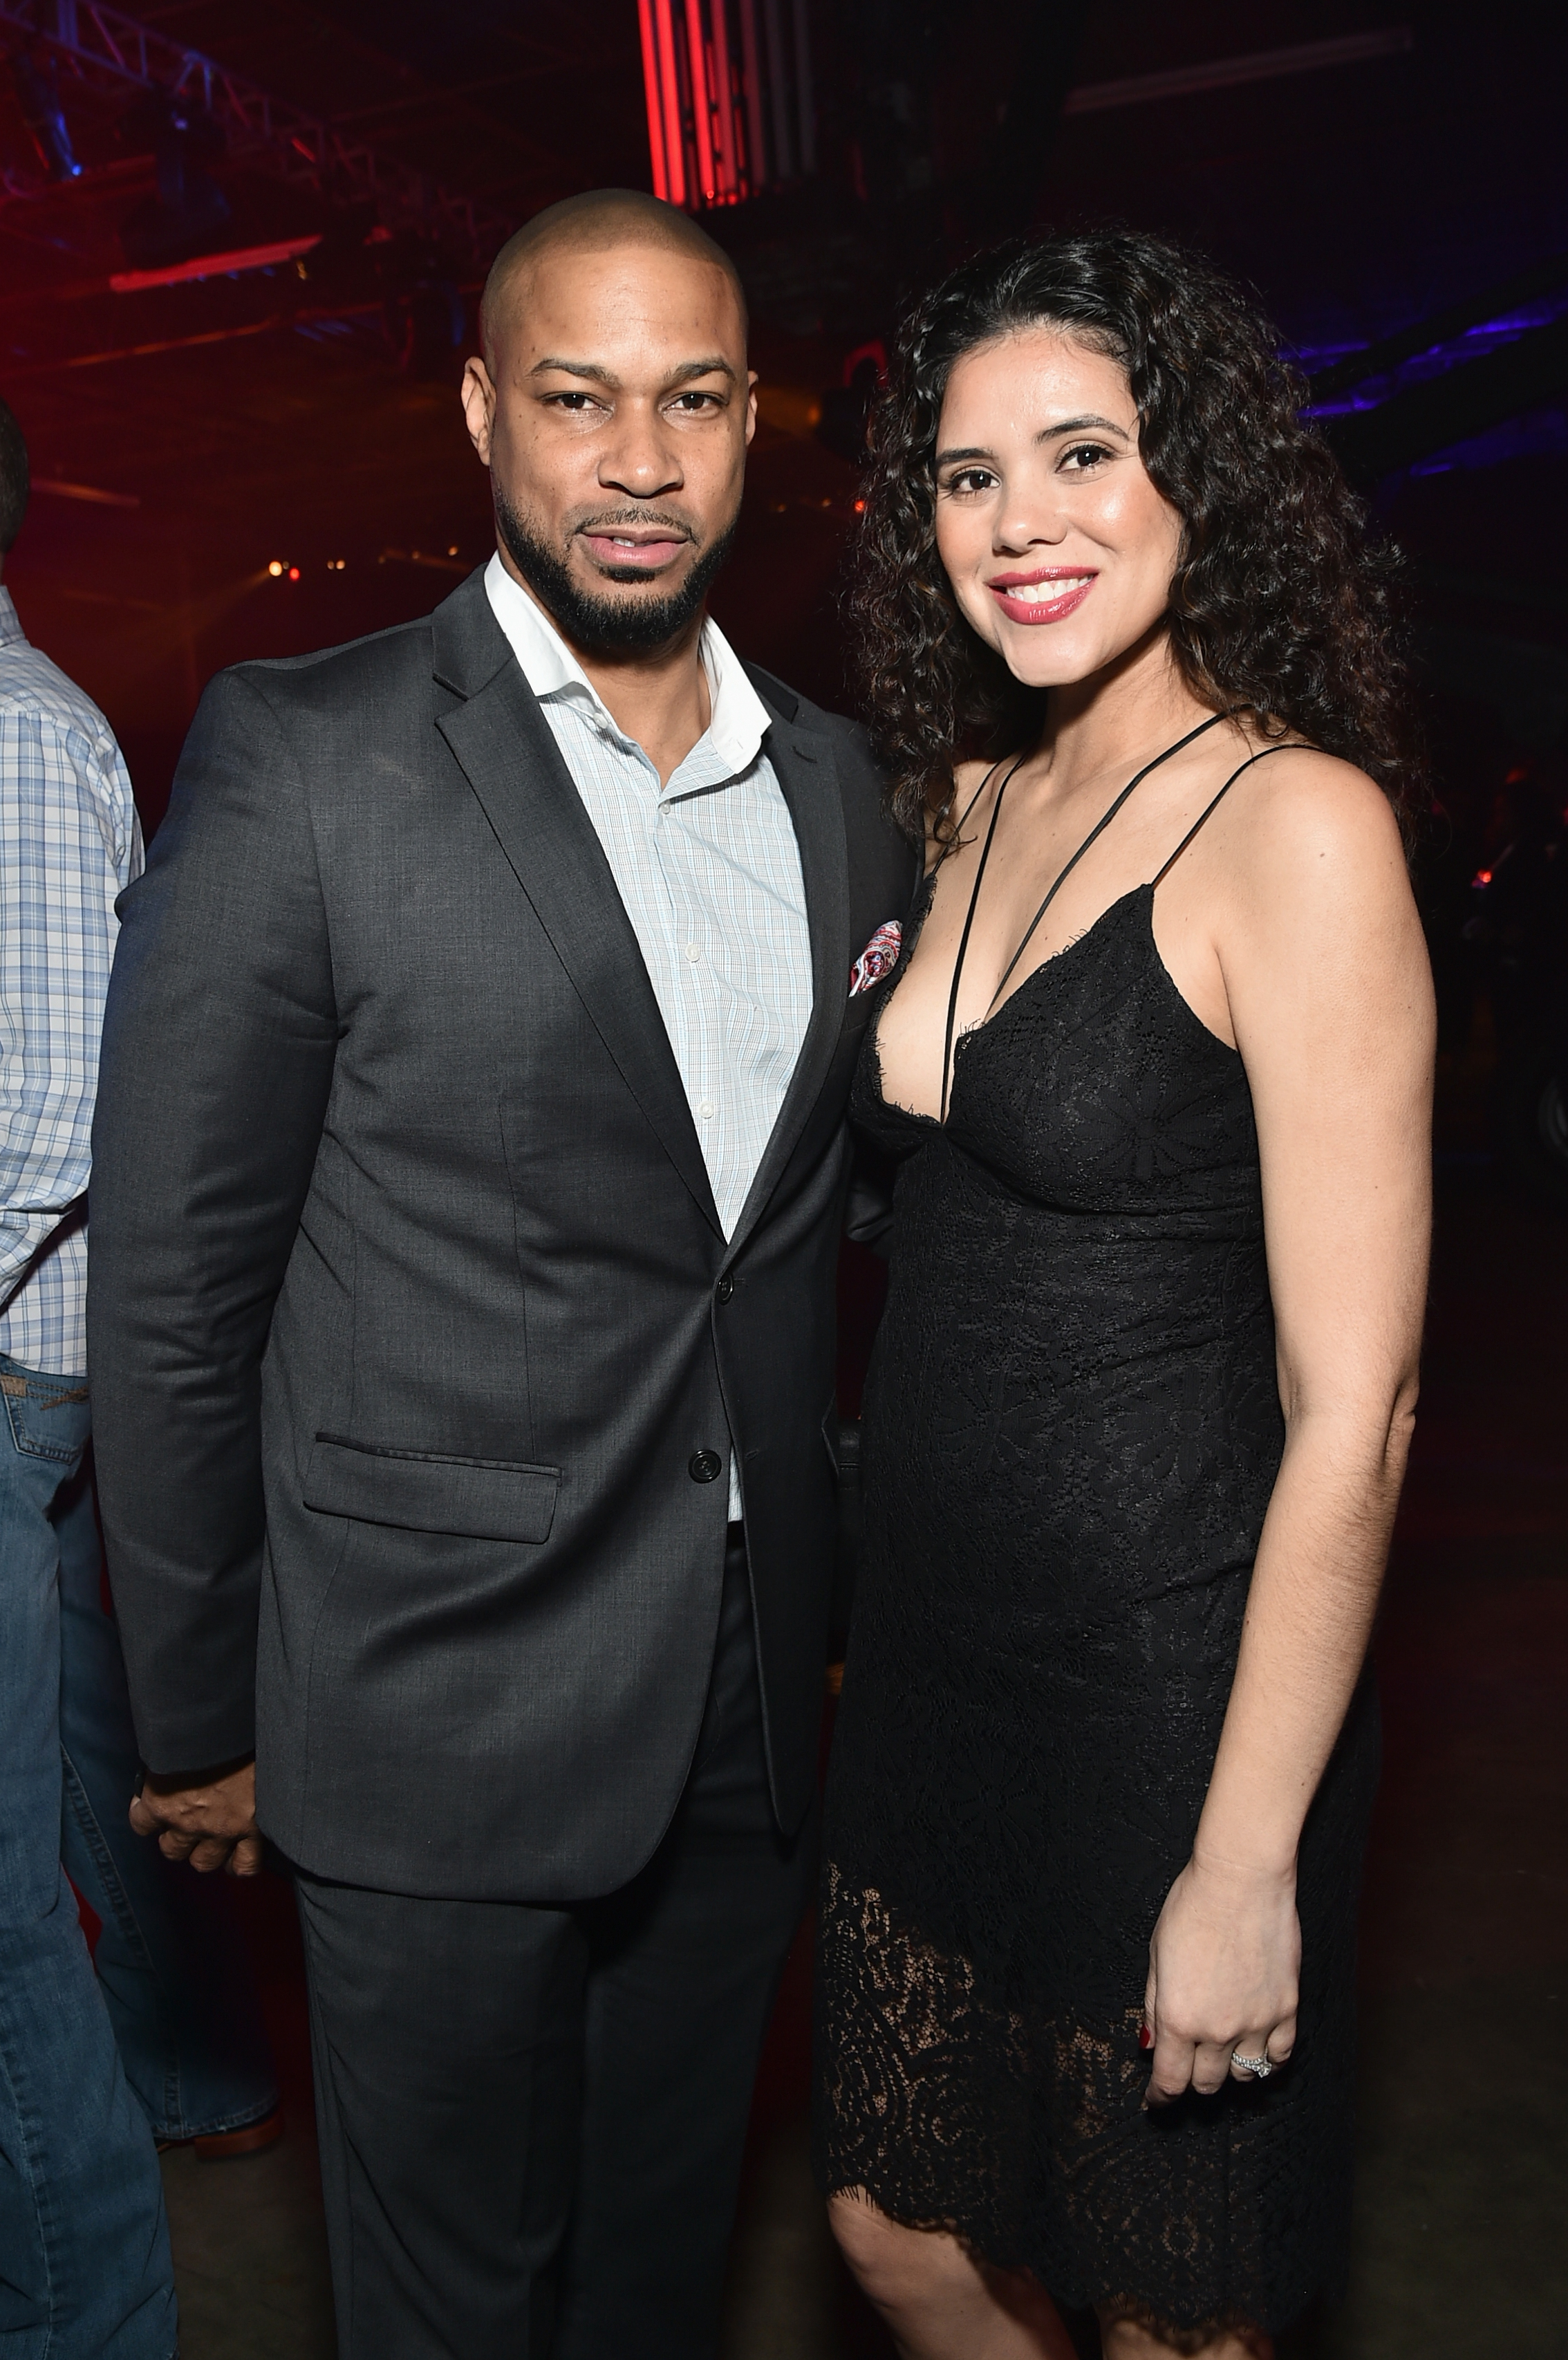 Finesse Mitchell and Adris DeBarge attend the 13th Annual ESPN The Party on February 3, 2017, in Houston, Texas. | Source: Getty Images